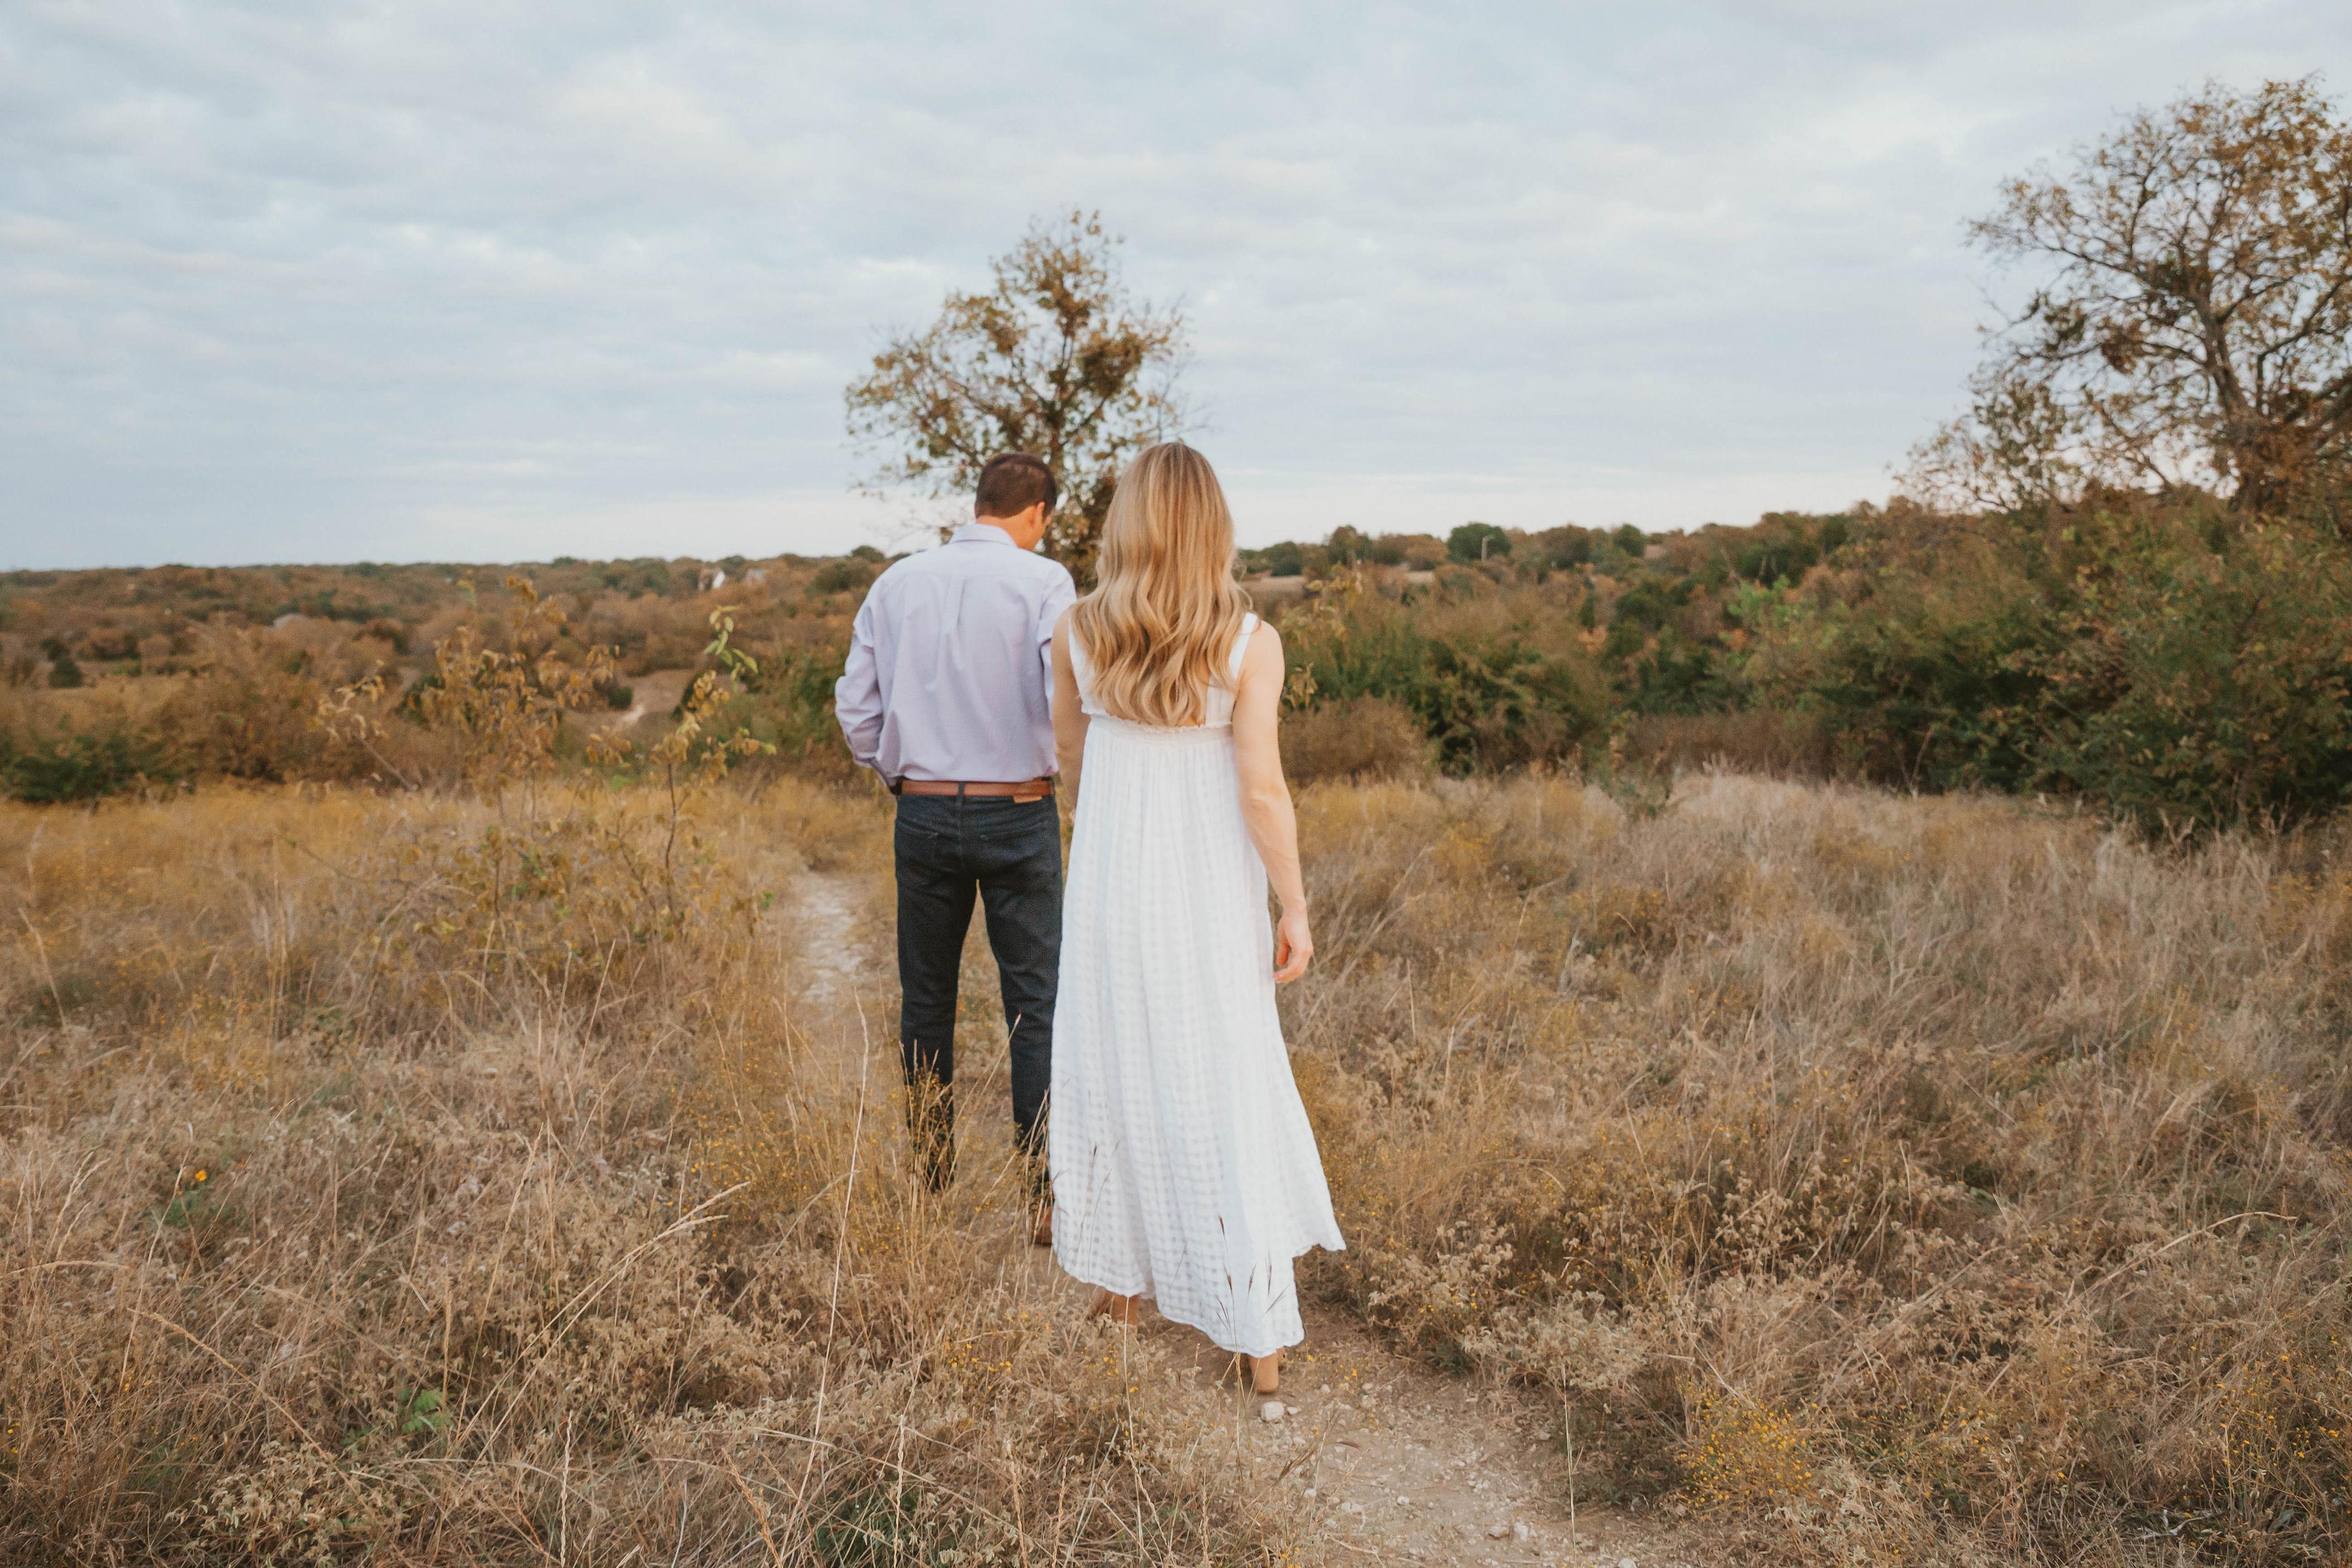 The Wedding Website of Madelyn Walker and Zach Nichols